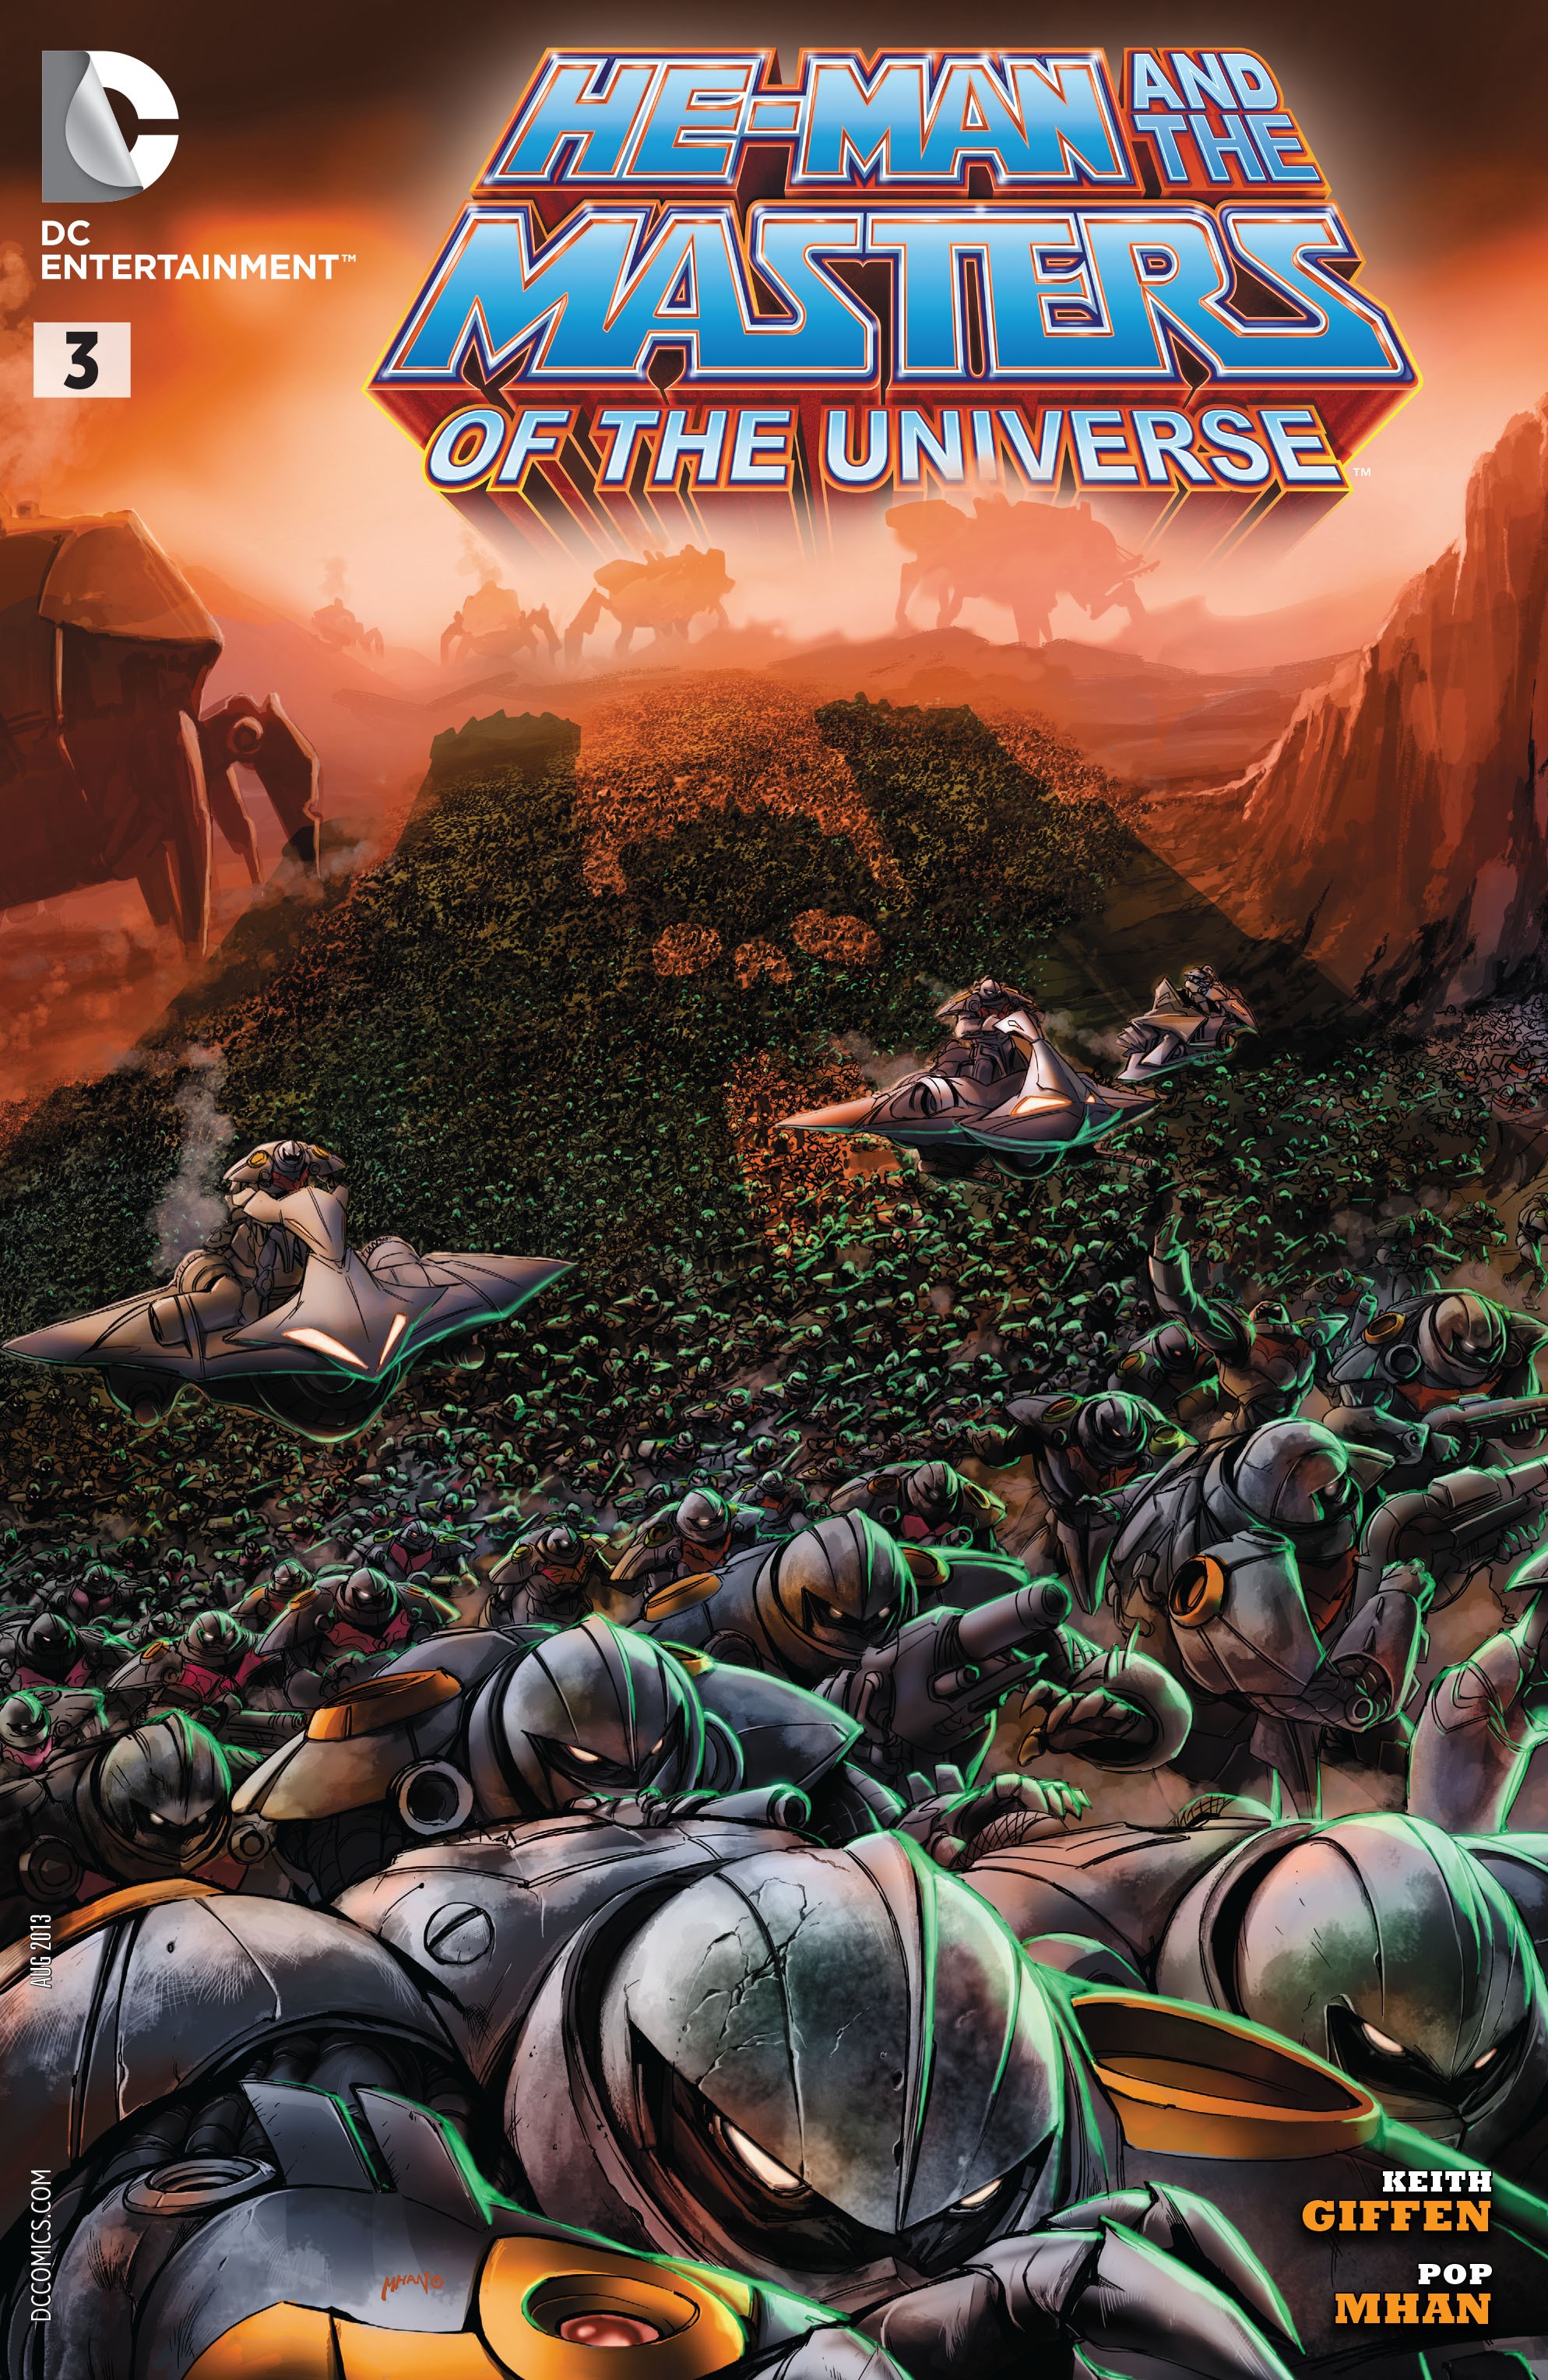 He-Man and the Masters of the Universe Vol. 2 #3